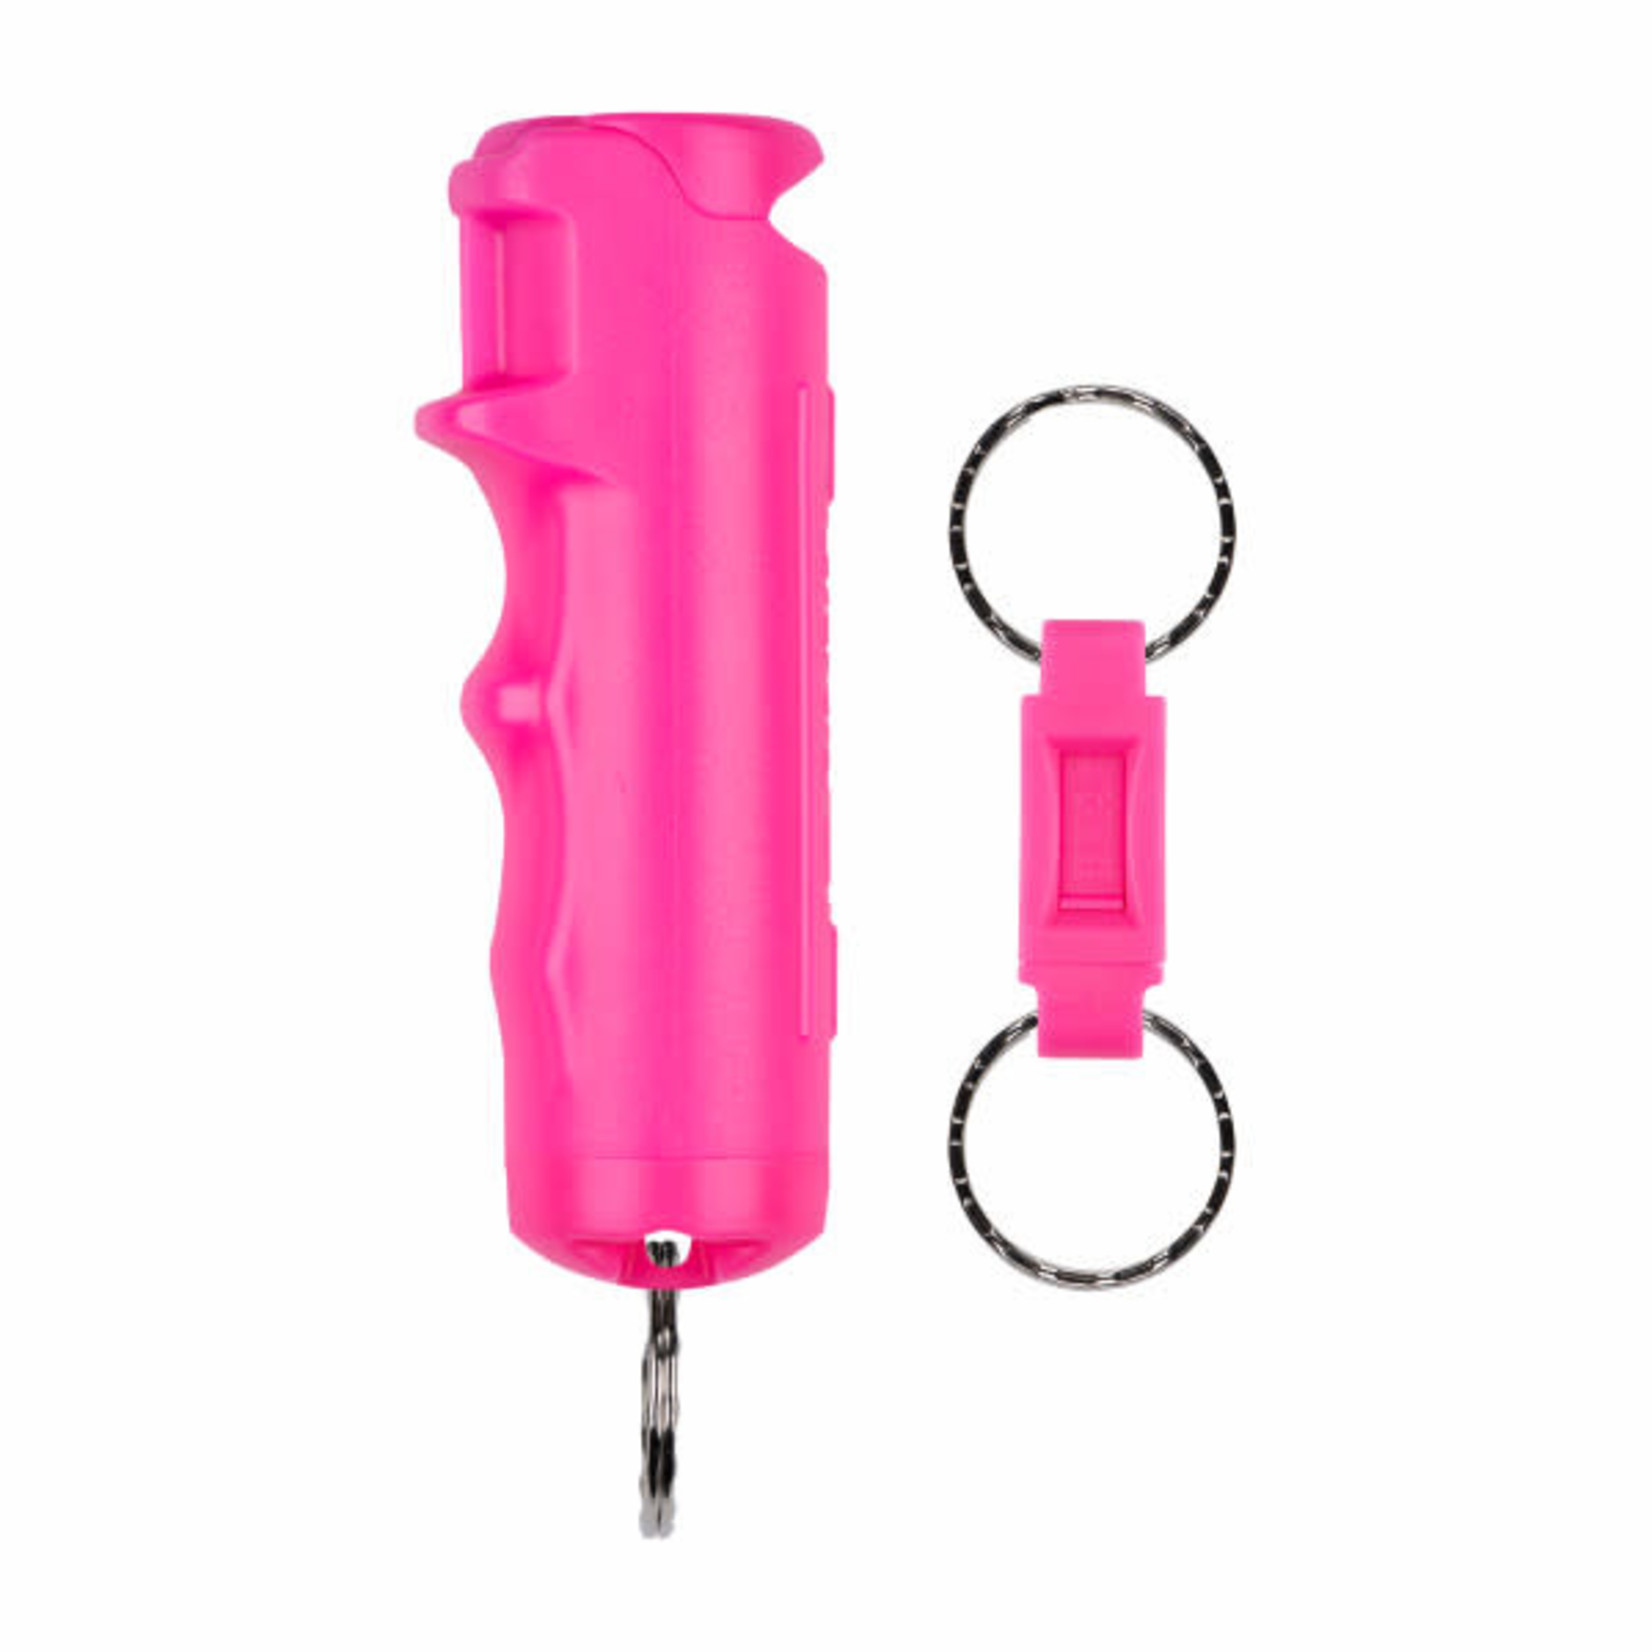 SABRE PEPPER SPRAY W/ QUICK RELEASE KEY RING - PINK